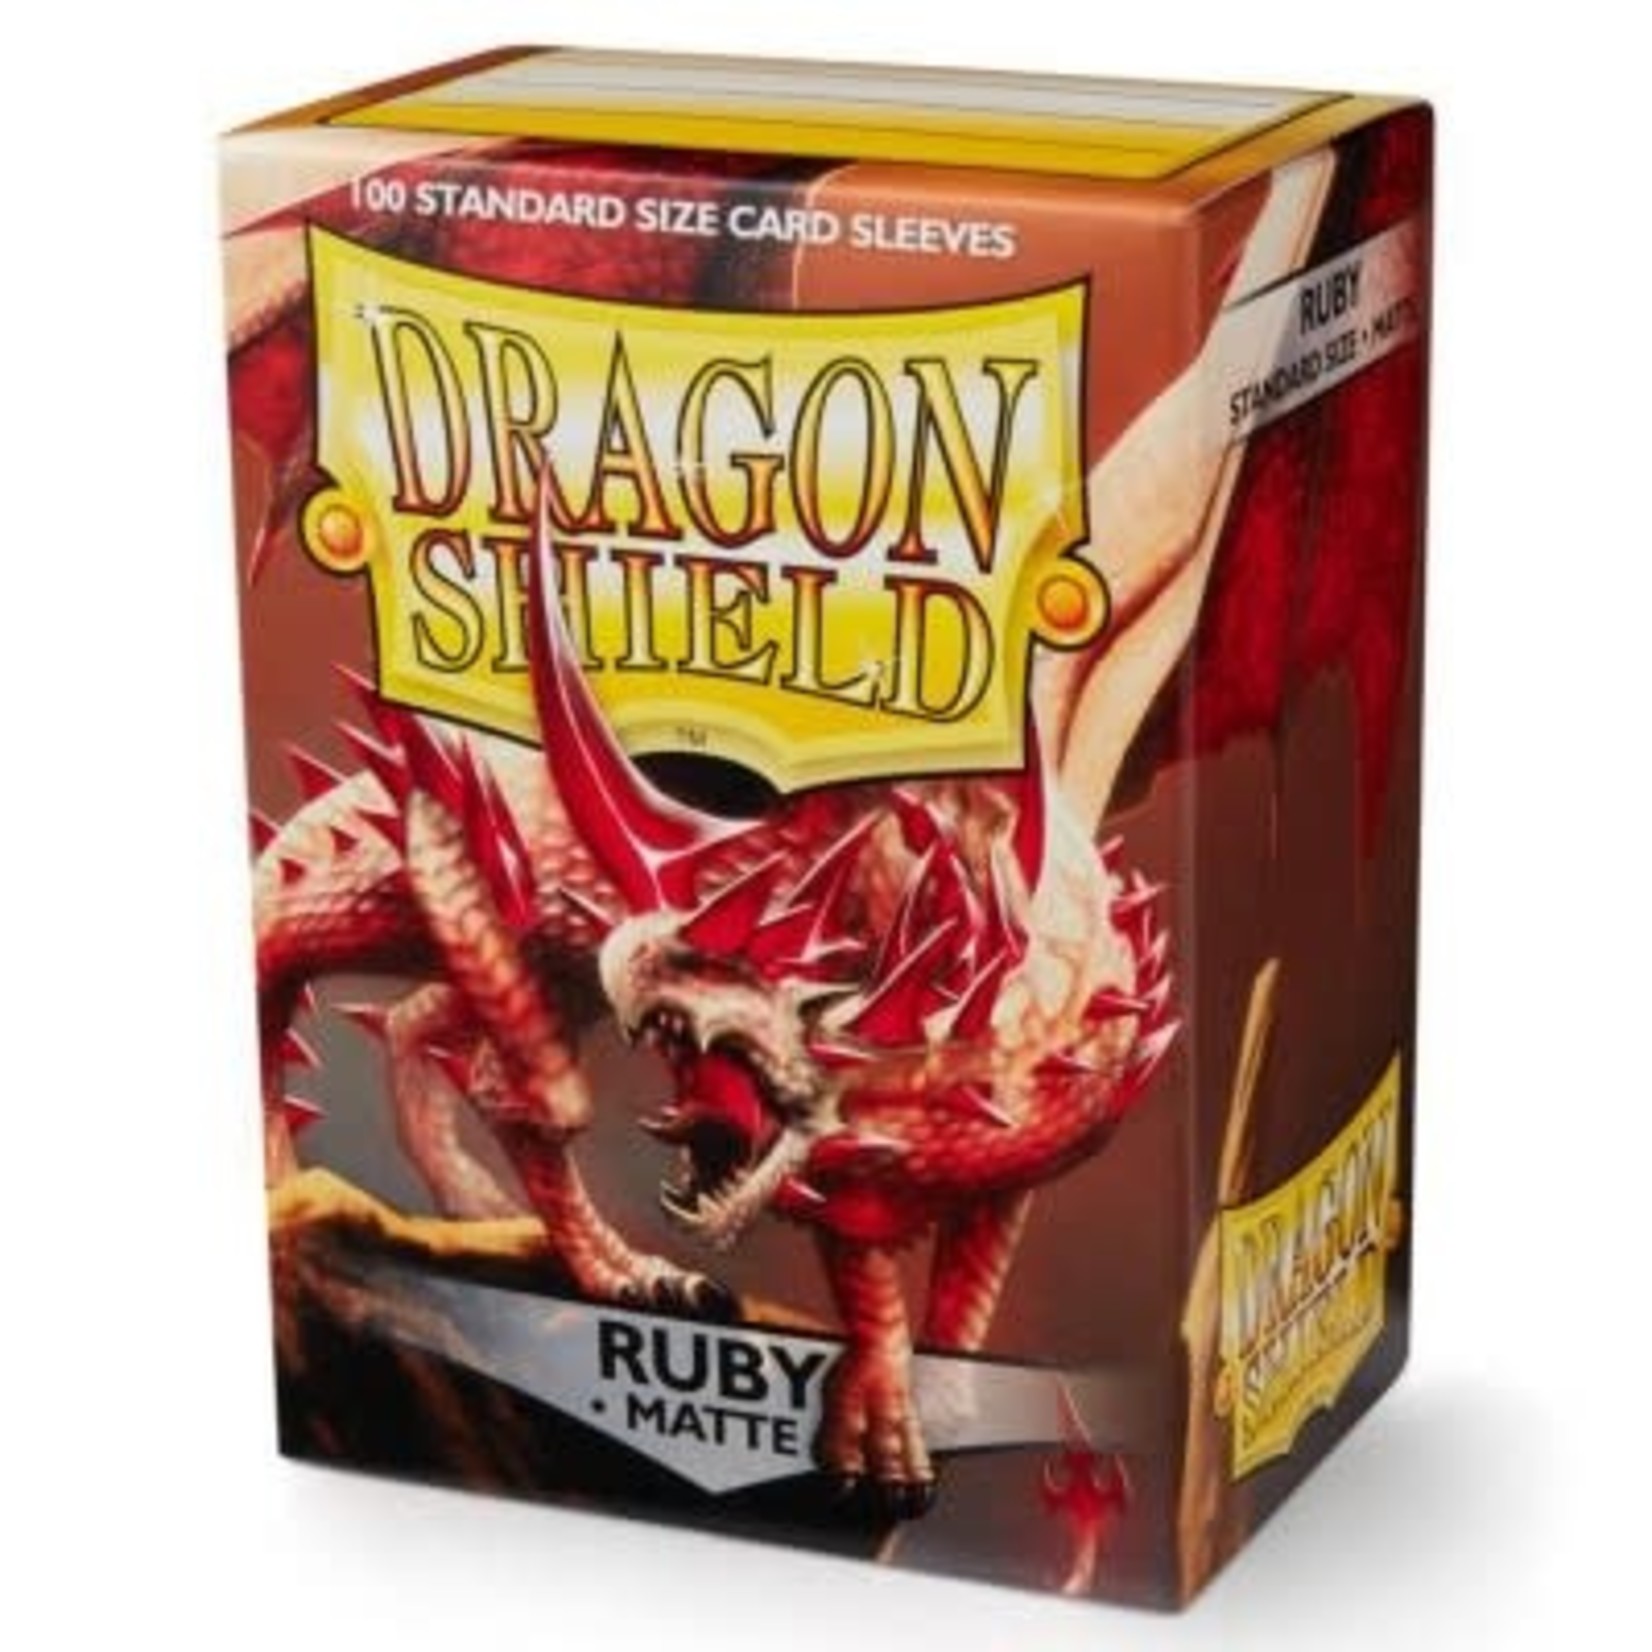 Card Sleeves: Solid Color Sleeves - Dragon Shields: (100) Matte